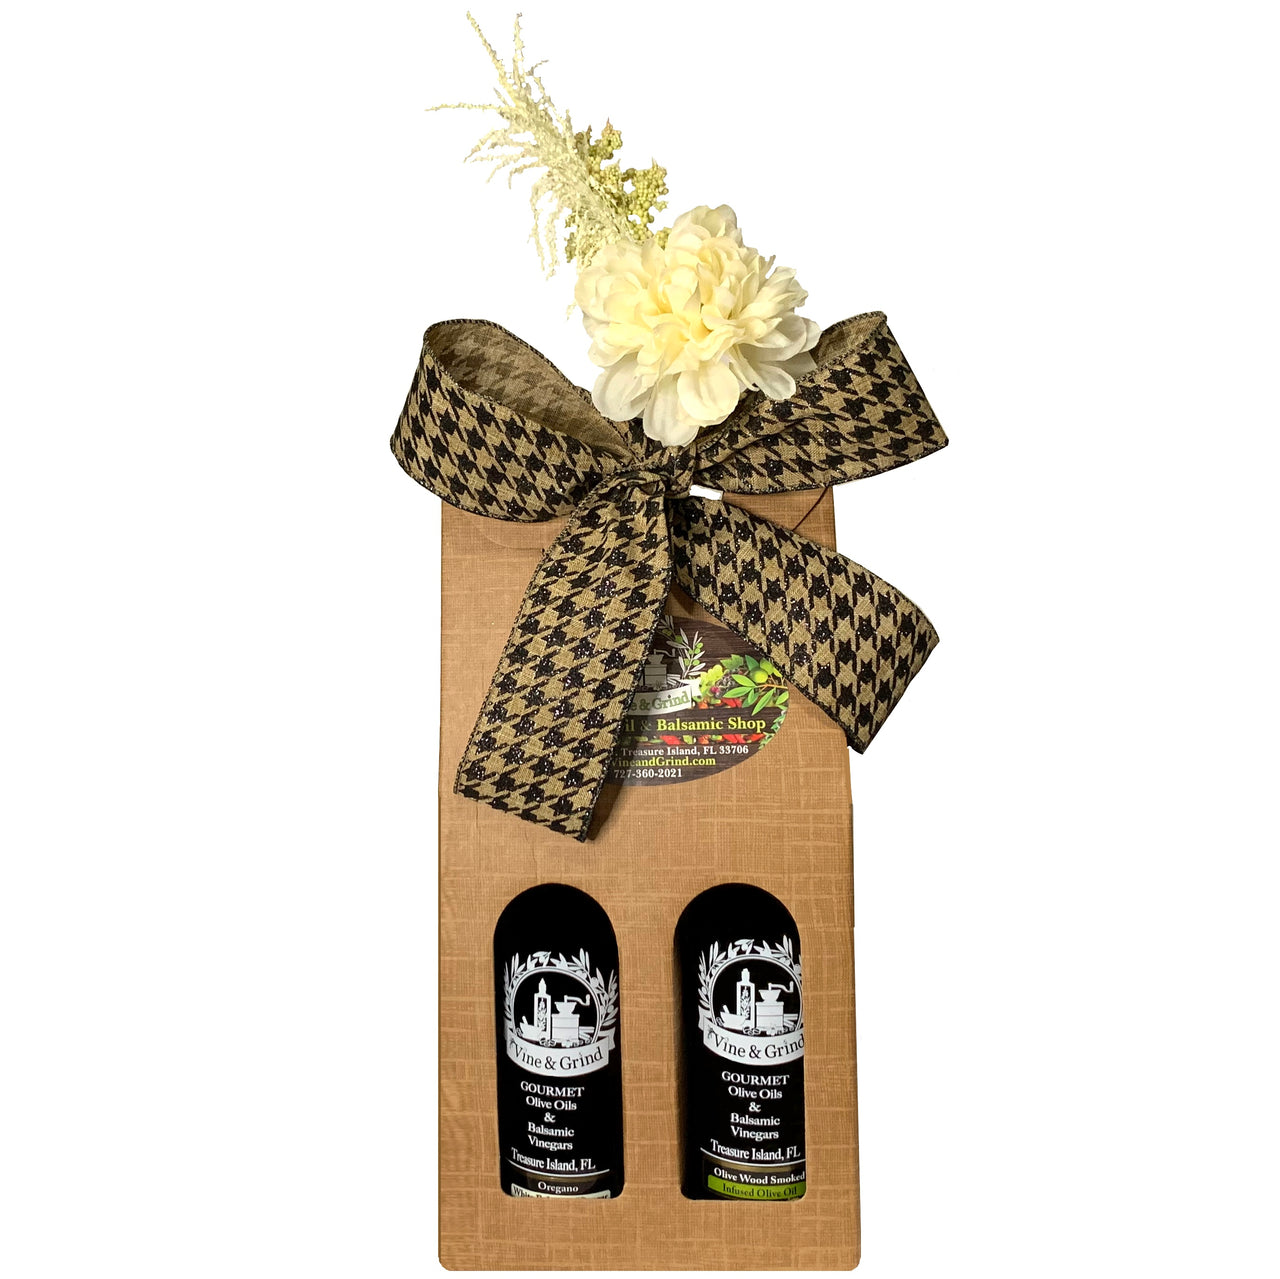 Two Bottle Gift Box